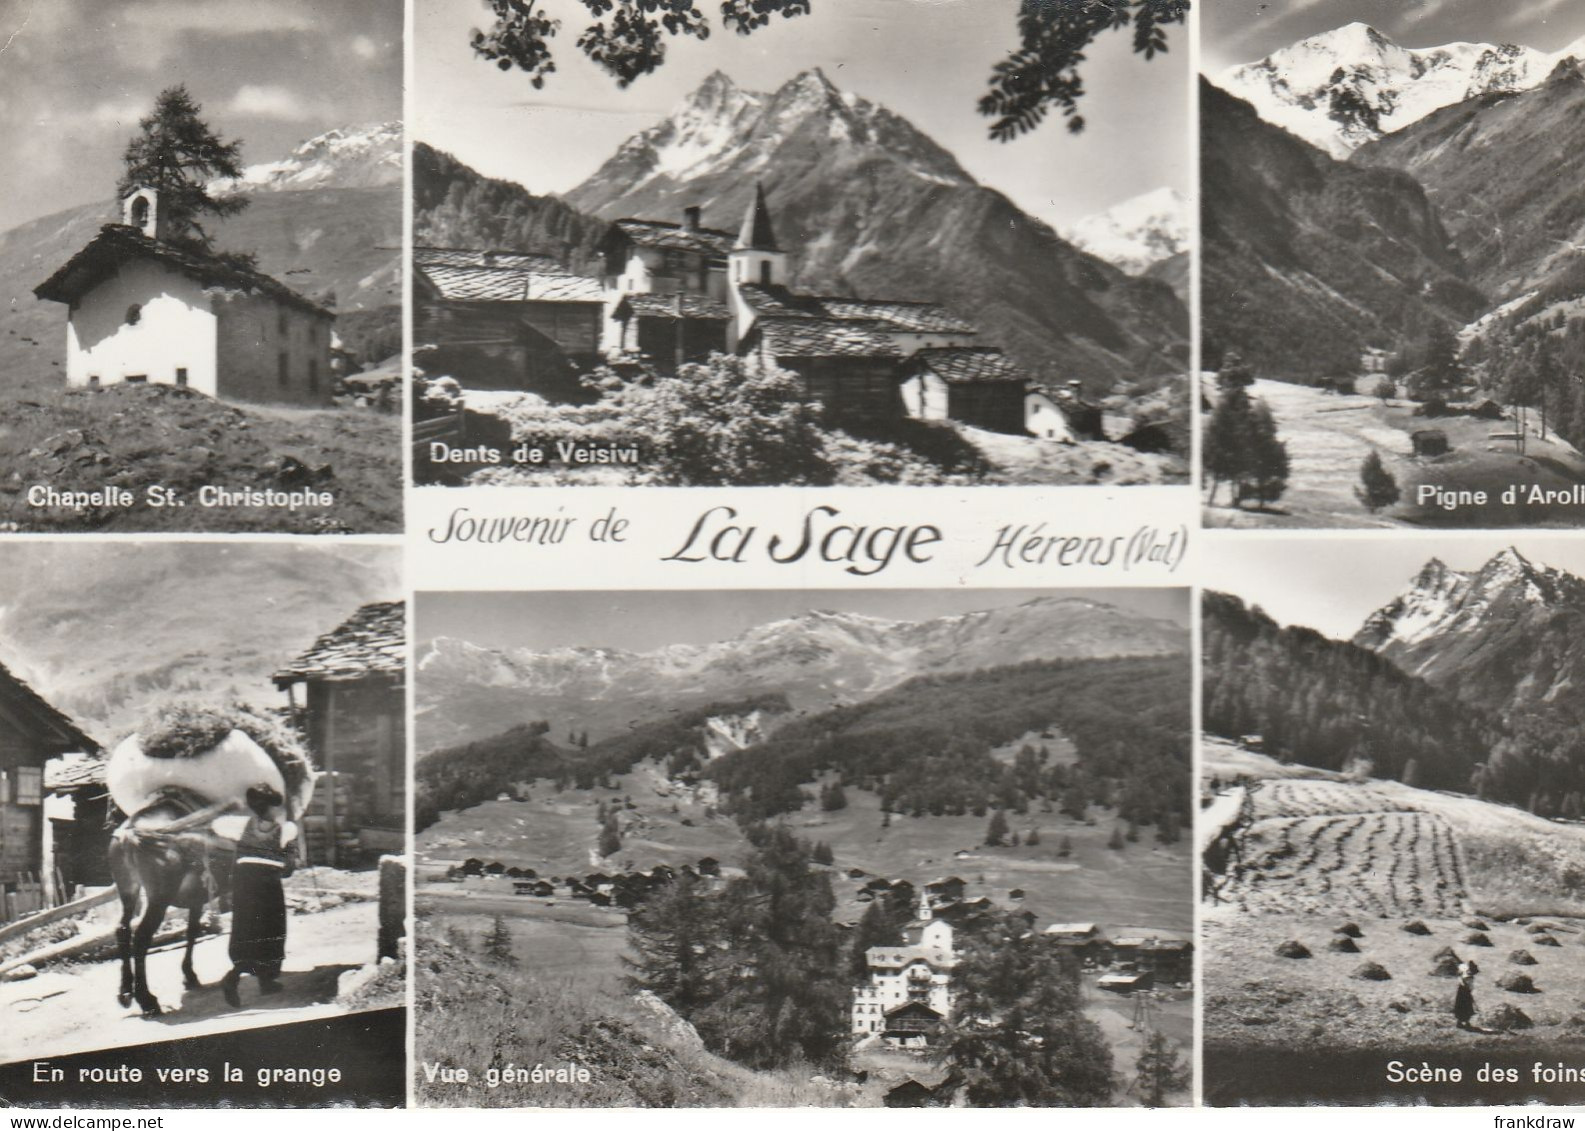 Postcard - La Sage Six Views - Card No.2857 - Posted But Date Unreadable - Very Good - Unclassified